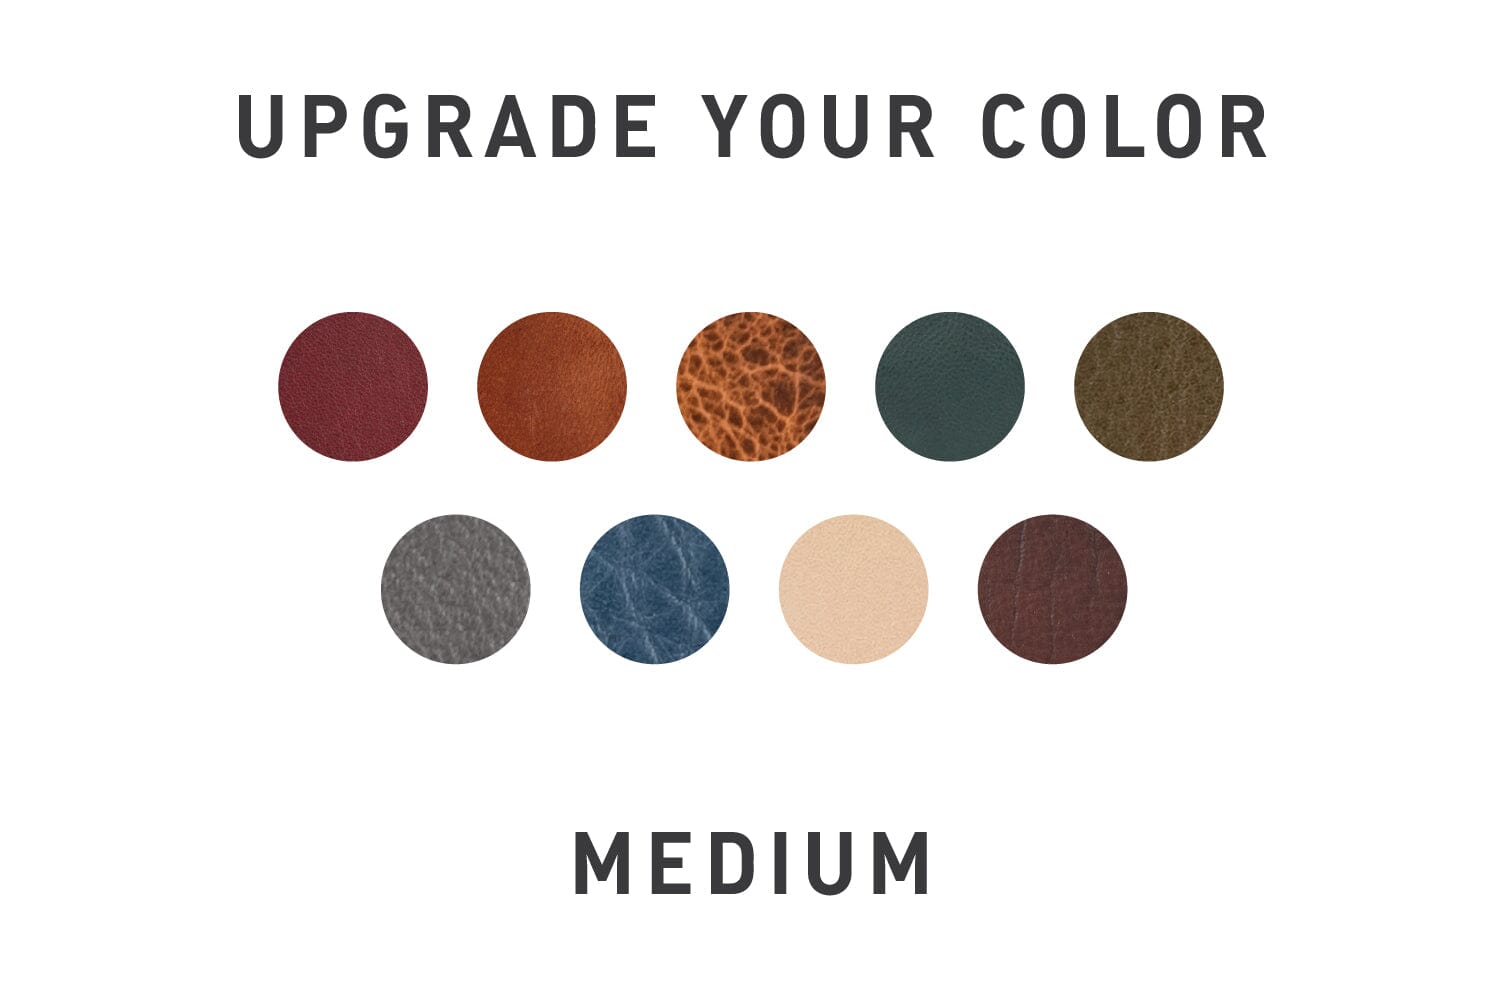 Upgrade to Limited Edition Color (Medium)